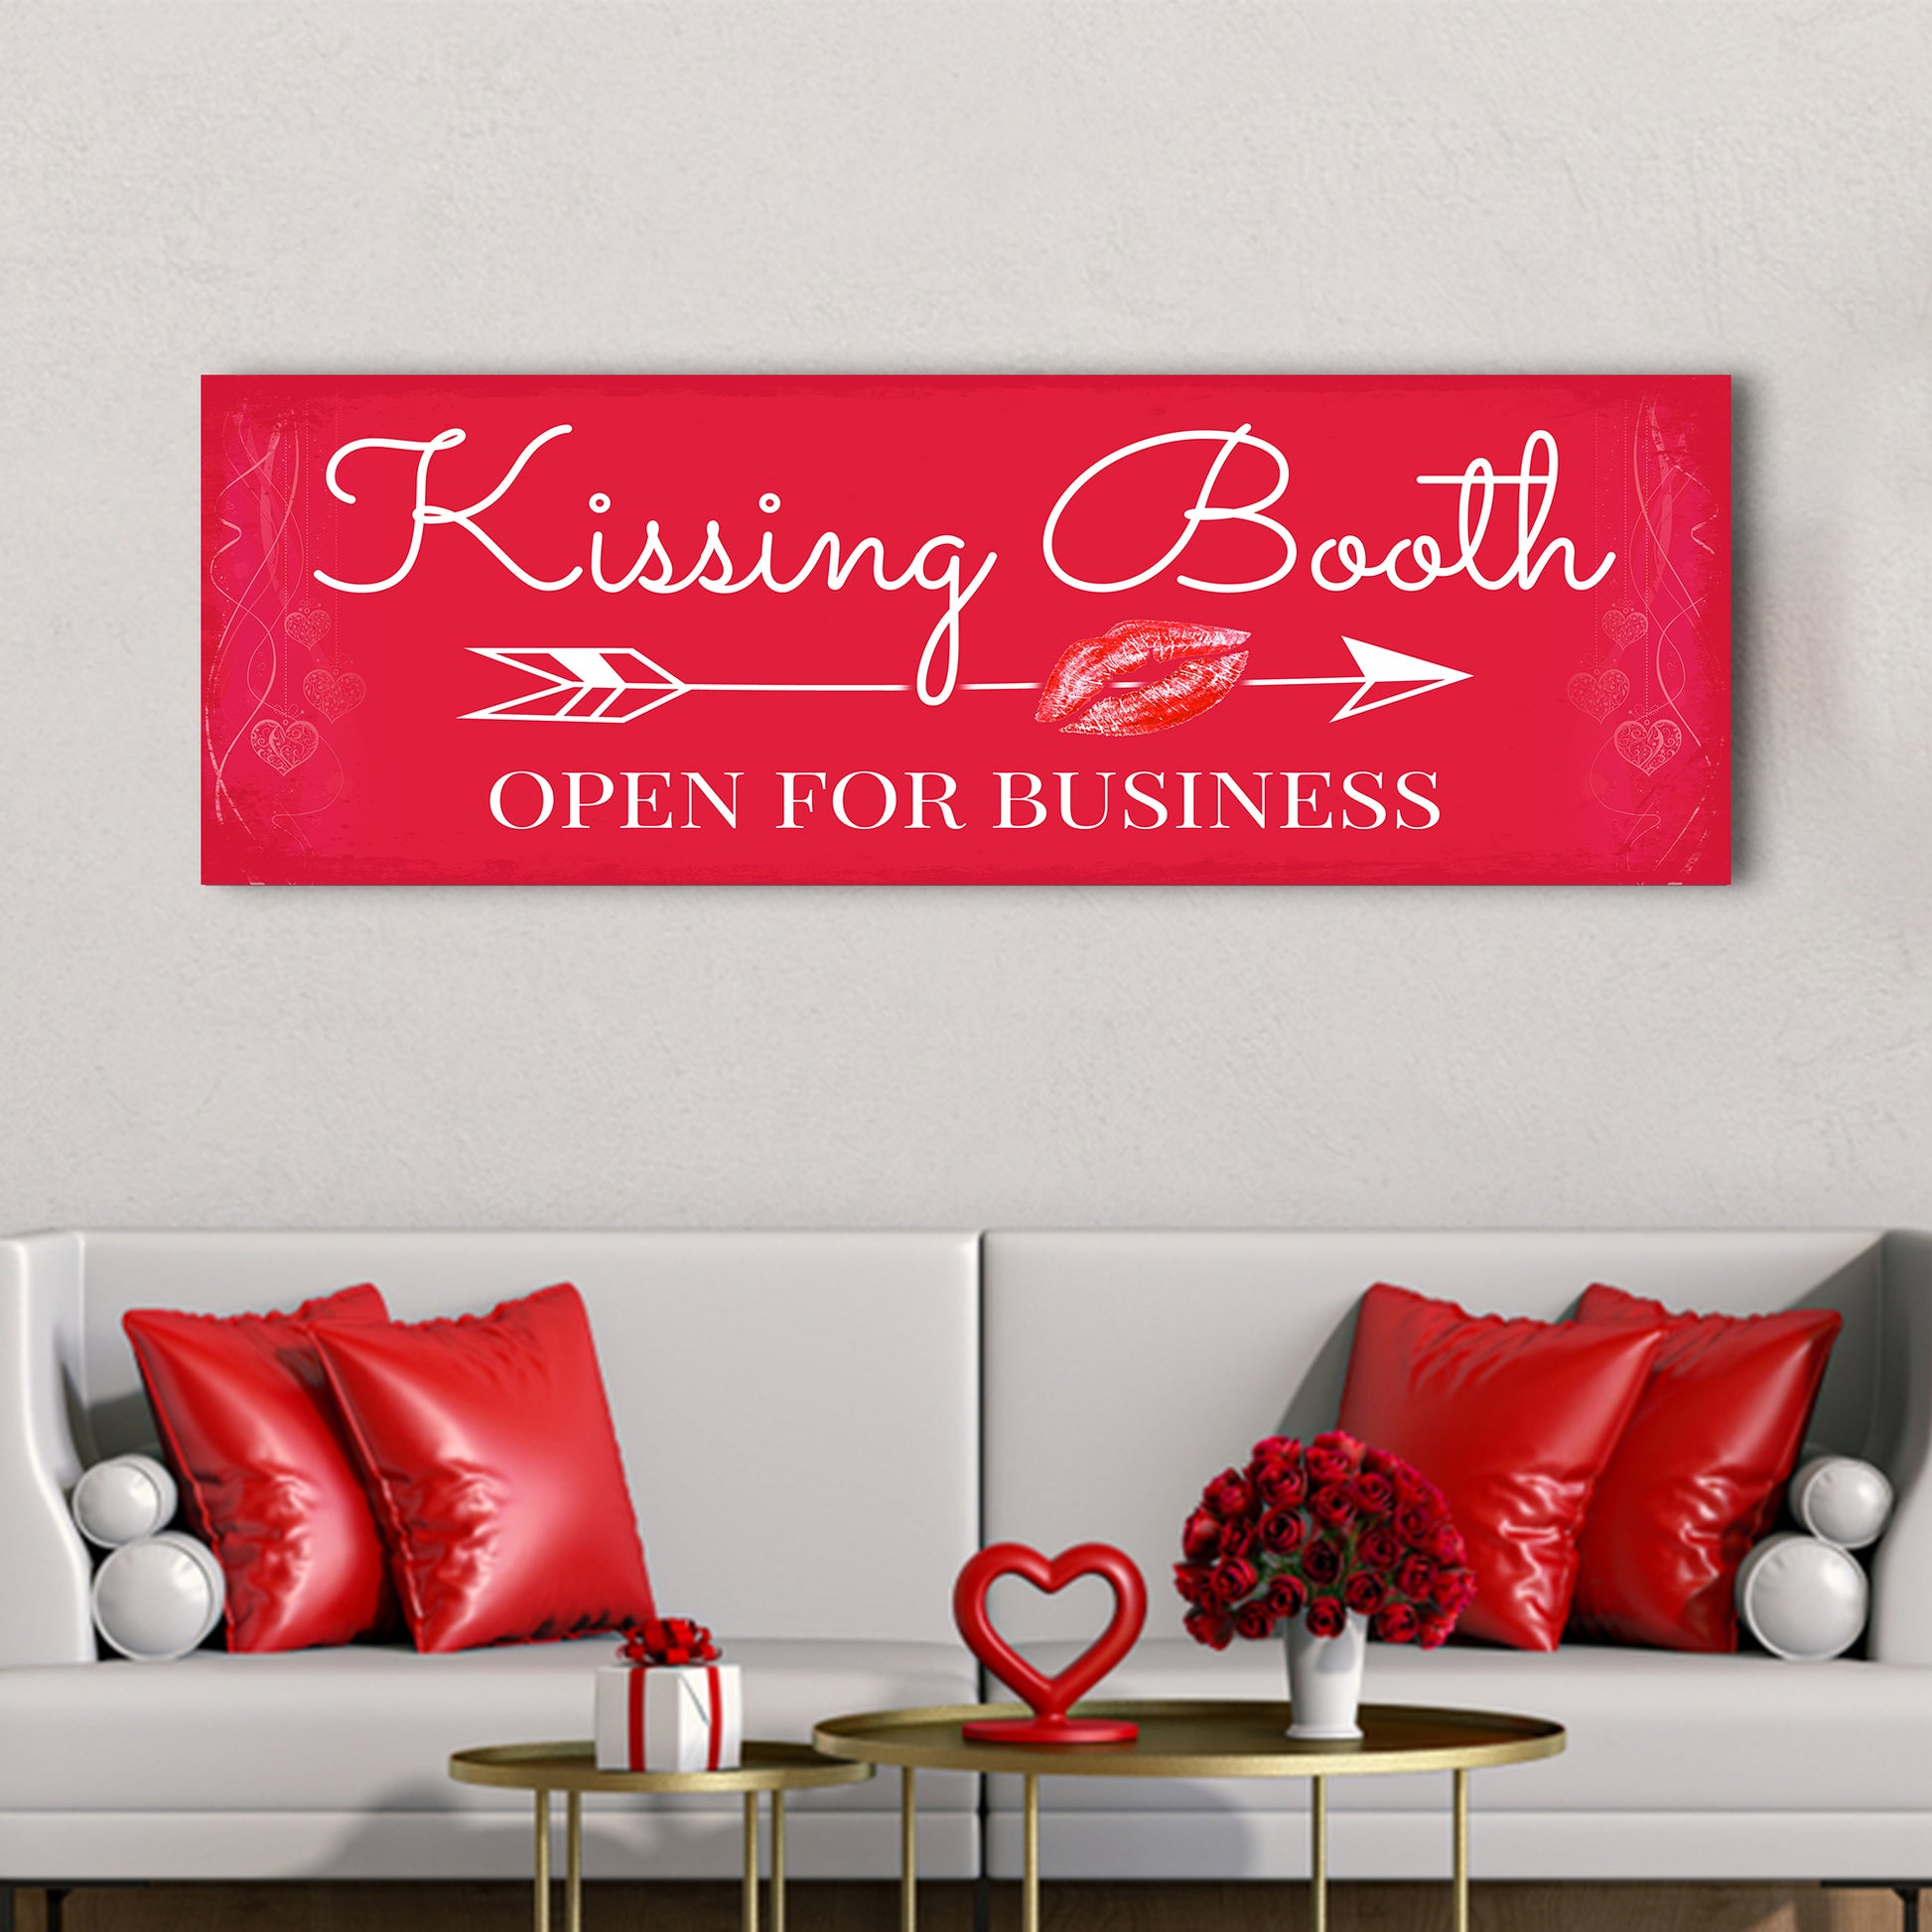 Kissing Booth "Open For Business" Sign - Image by Tailored Canvases